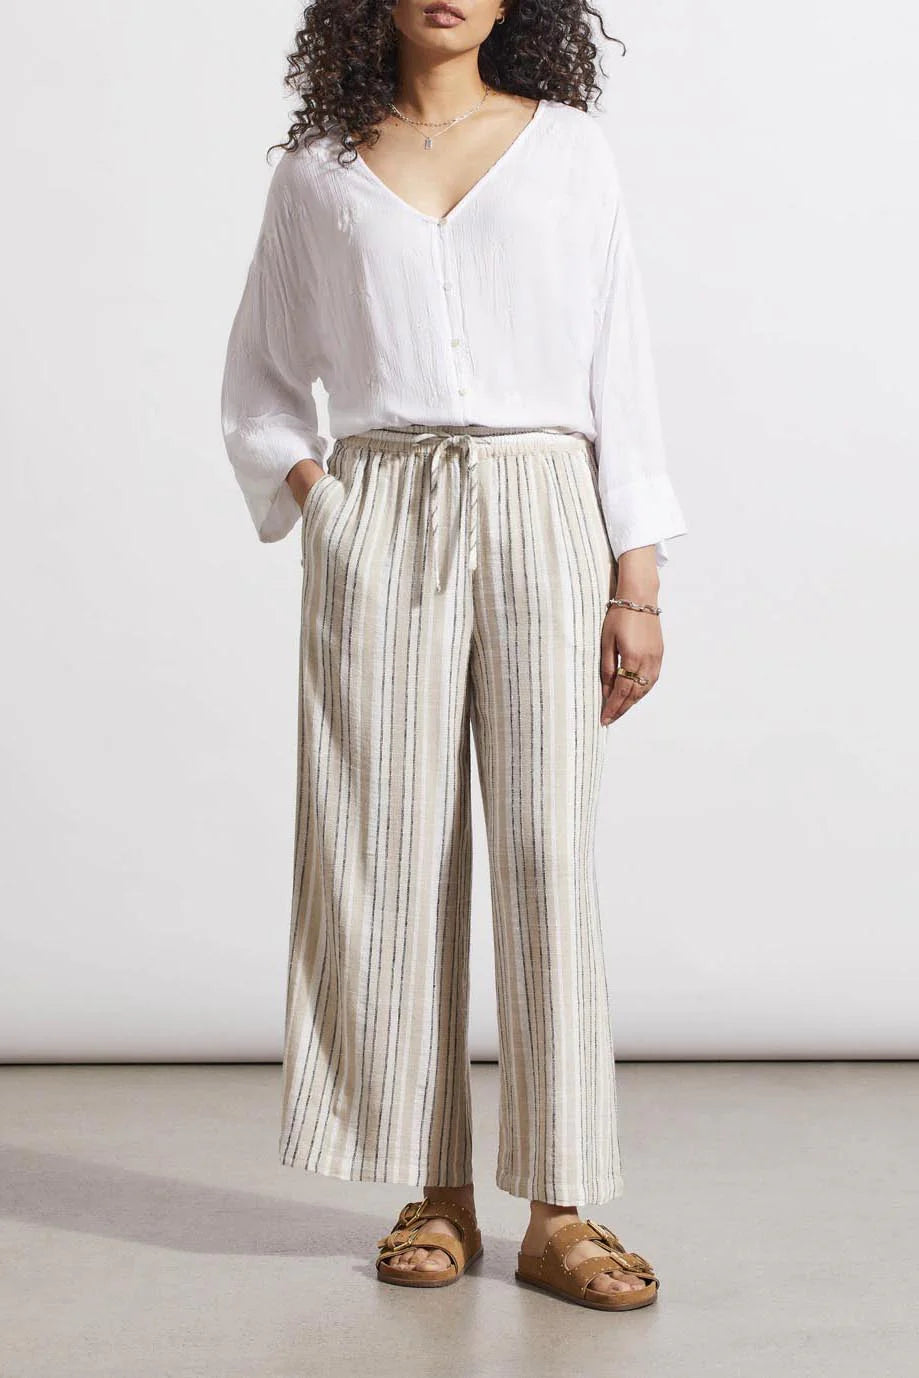 Tribal Fashions Striped Linen Pant with Drawstring Waist